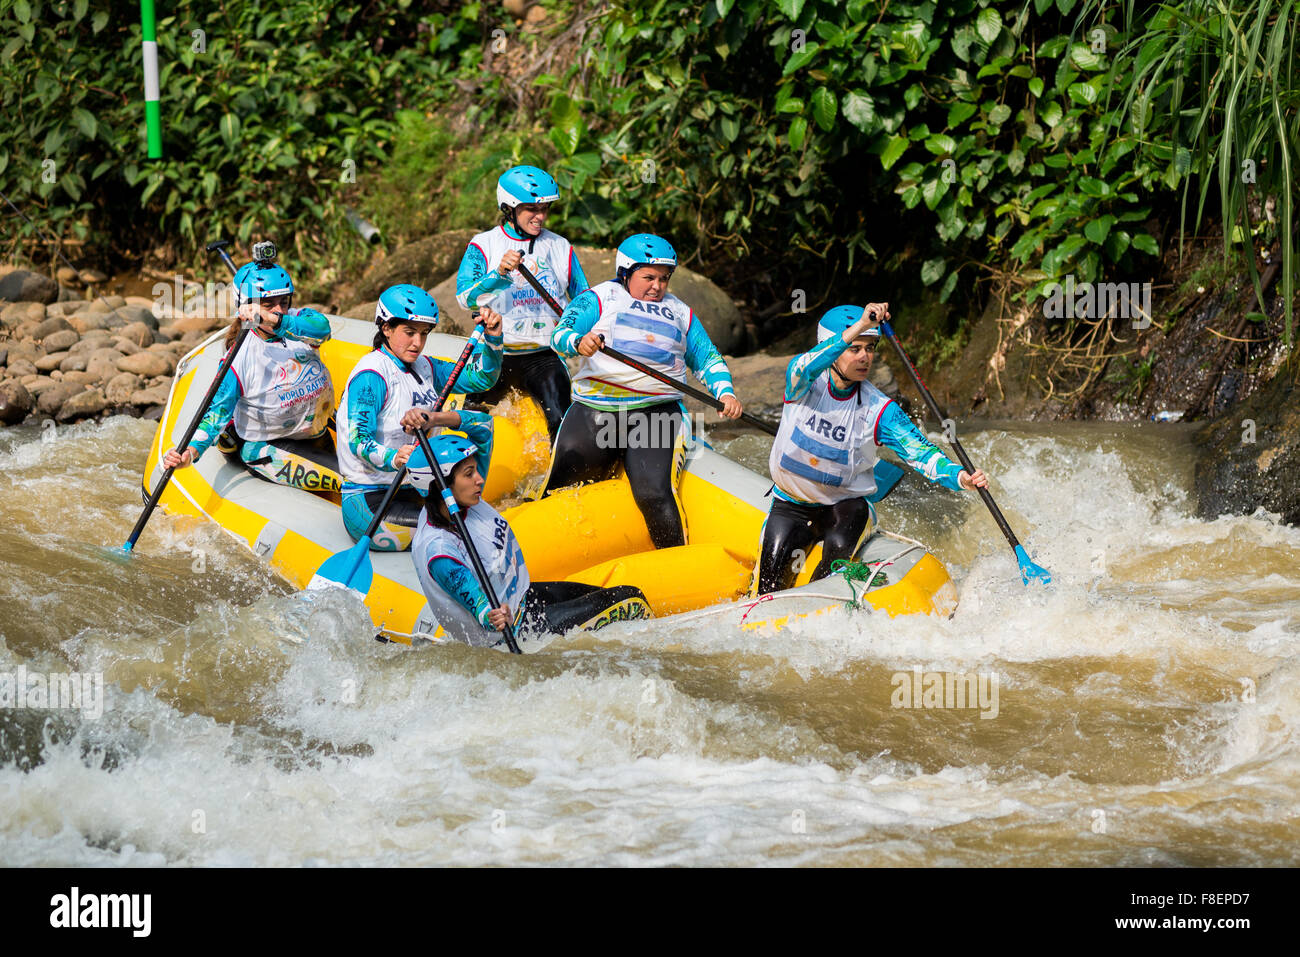 Argentina open women's team during sprint race category on 2015 World Rafting Championship. Stock Photo